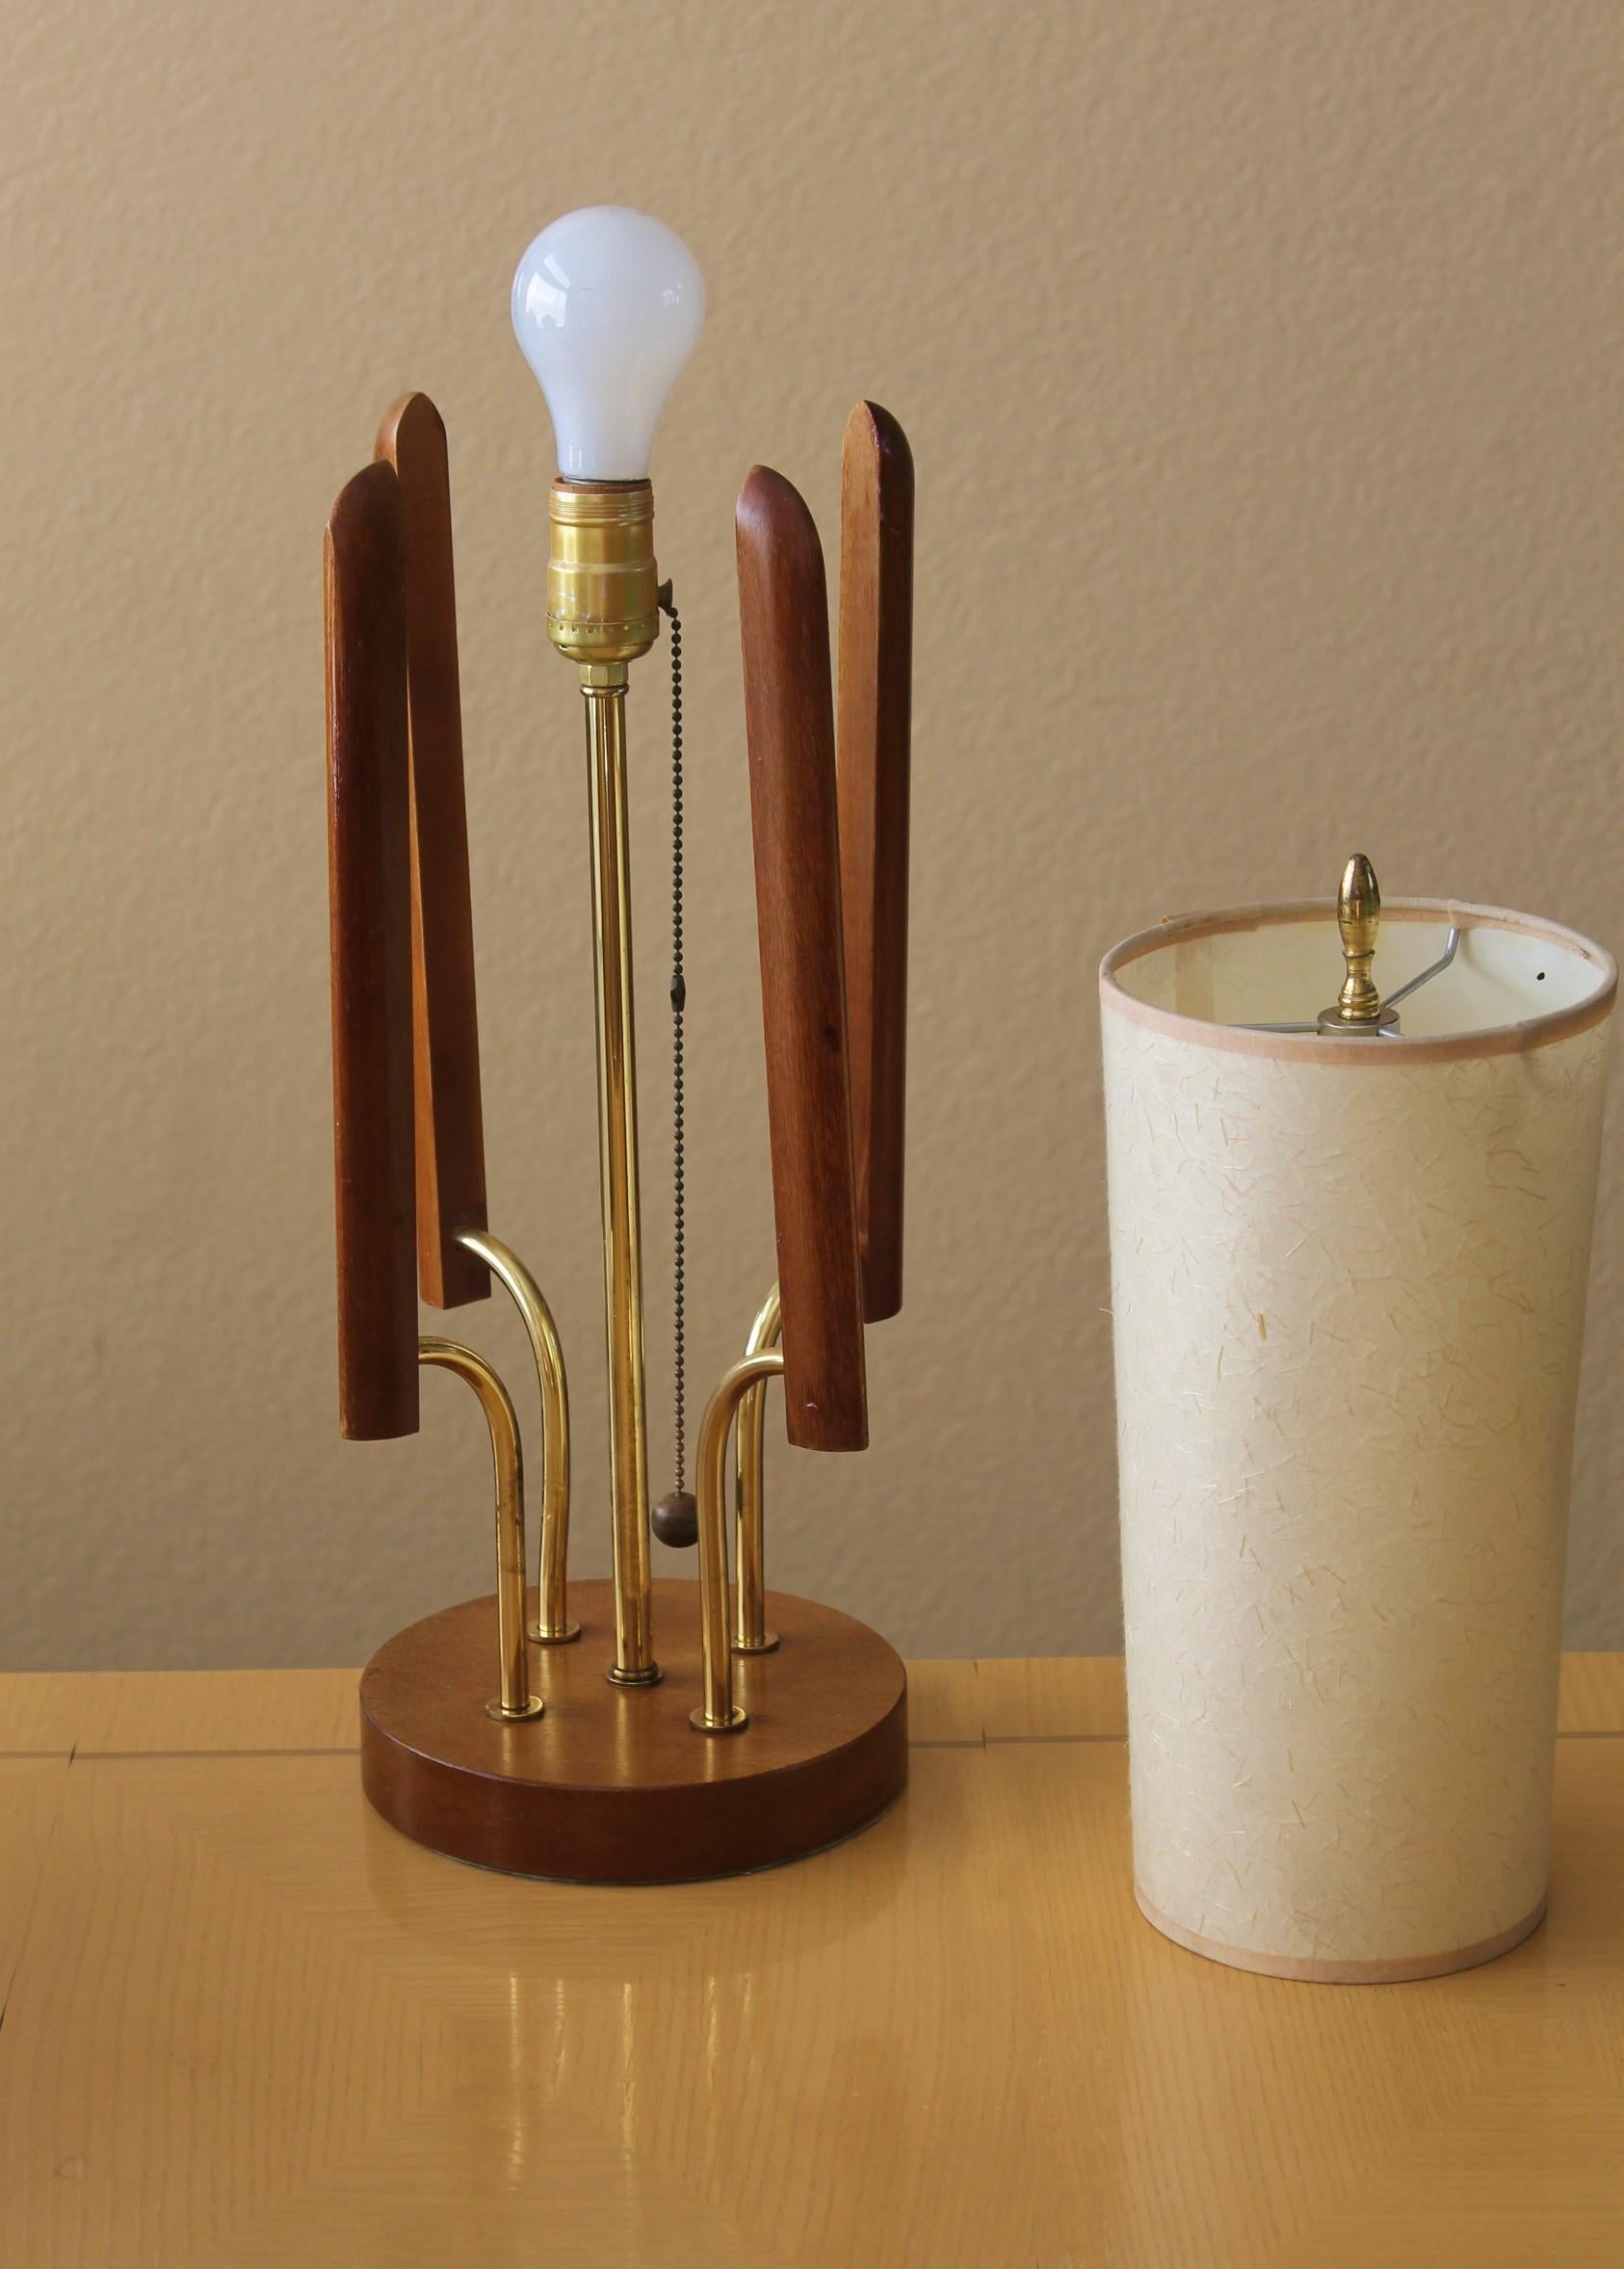 
Gorgeous!

DANISH MODERN
TEAK & BRASS TABLE LAMP
BY MODELINE

Design Attributed to Adrian Pearsall

This lamp is a striking example of the best of Mid Century Modern Danish Modern design!  The best brass and finest teak work together to defy